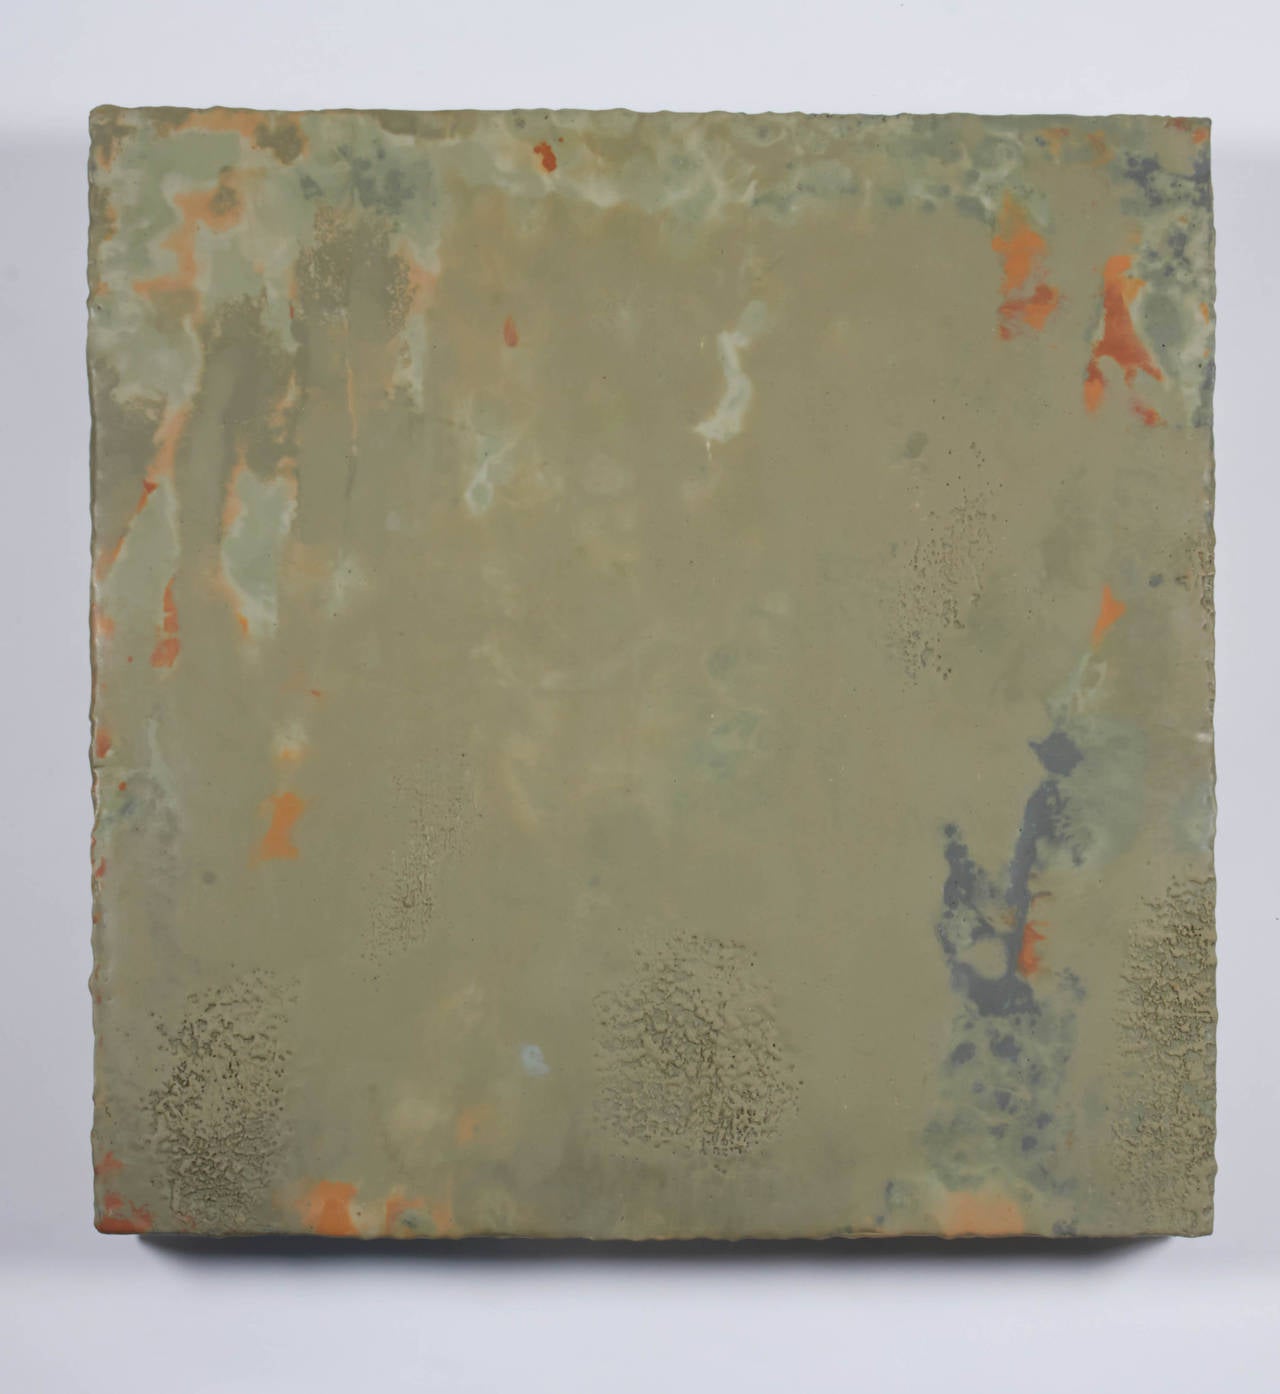 Richard Hirsch Encaustic Painting of Nothing Series, circa 2010 - 2012 In Excellent Condition For Sale In New York, NY